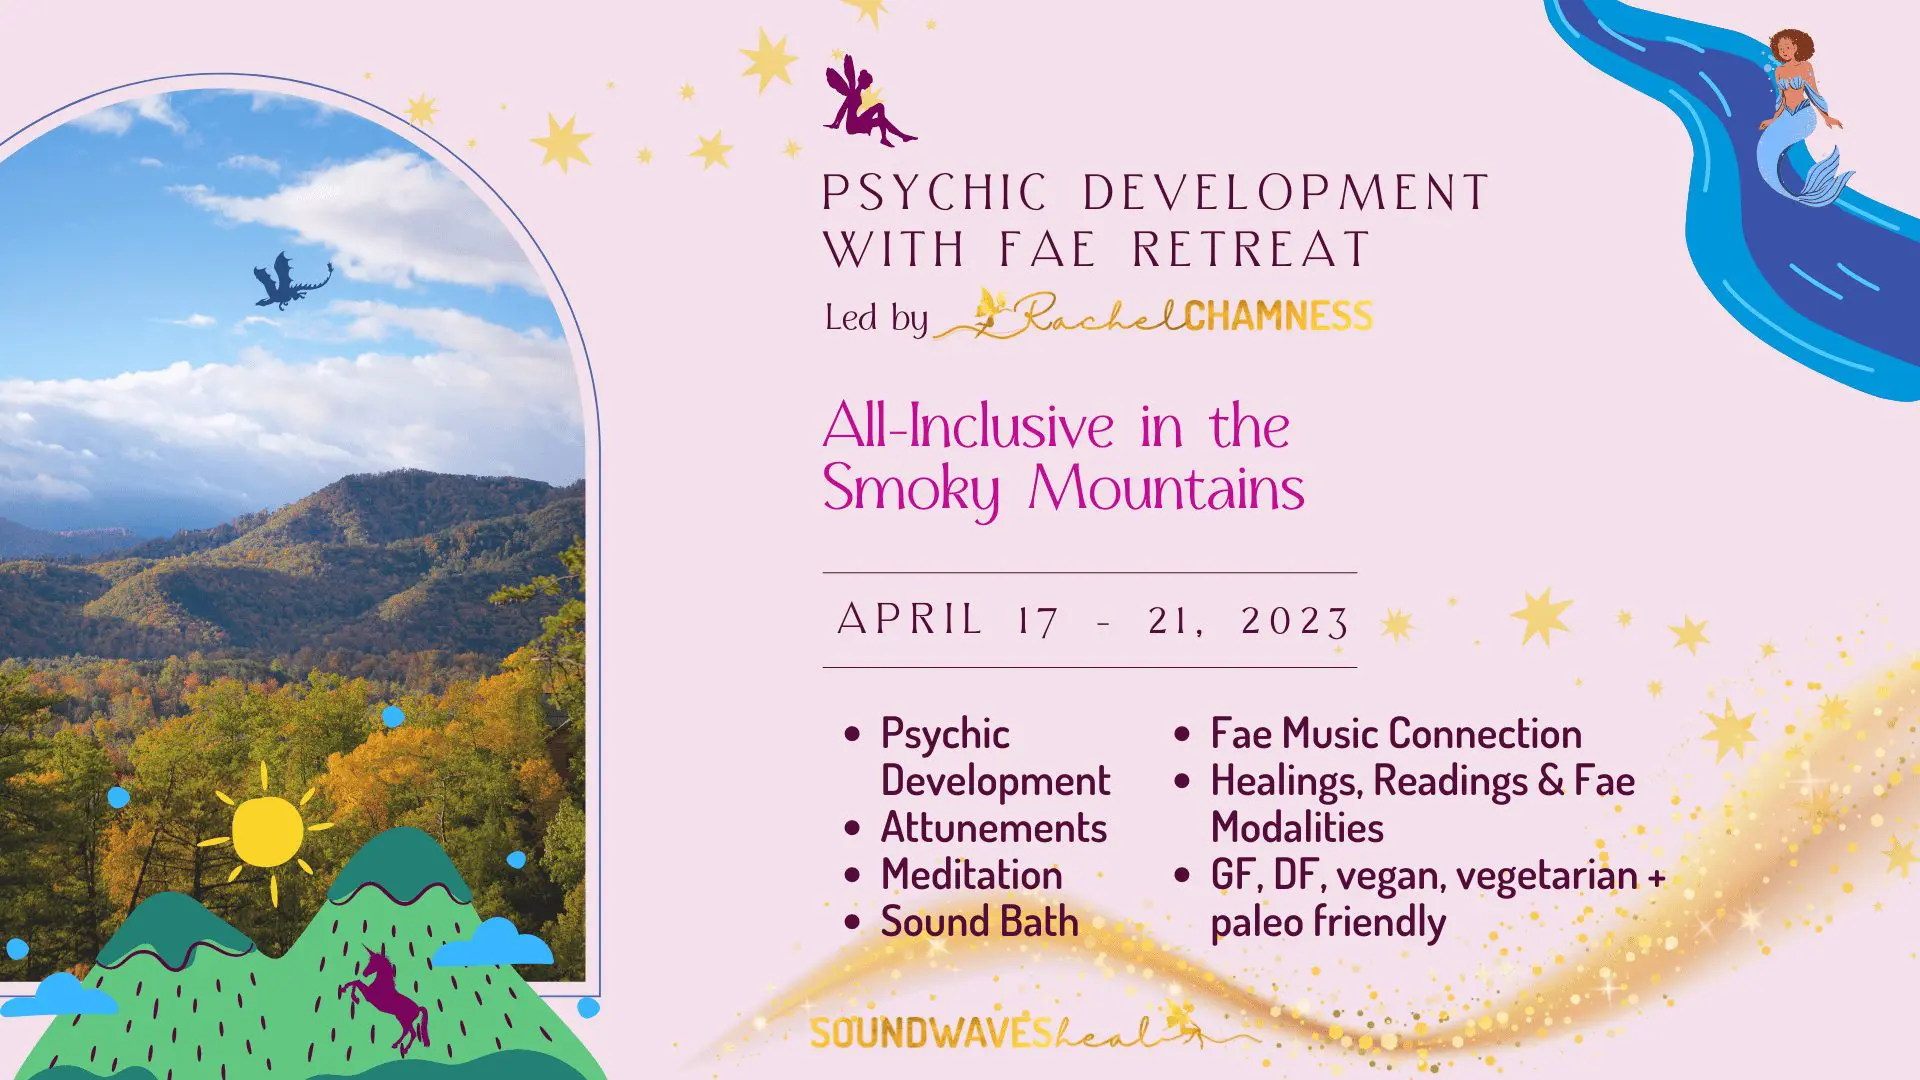 2023 Psychic Development with the Fae Retreat Schedule